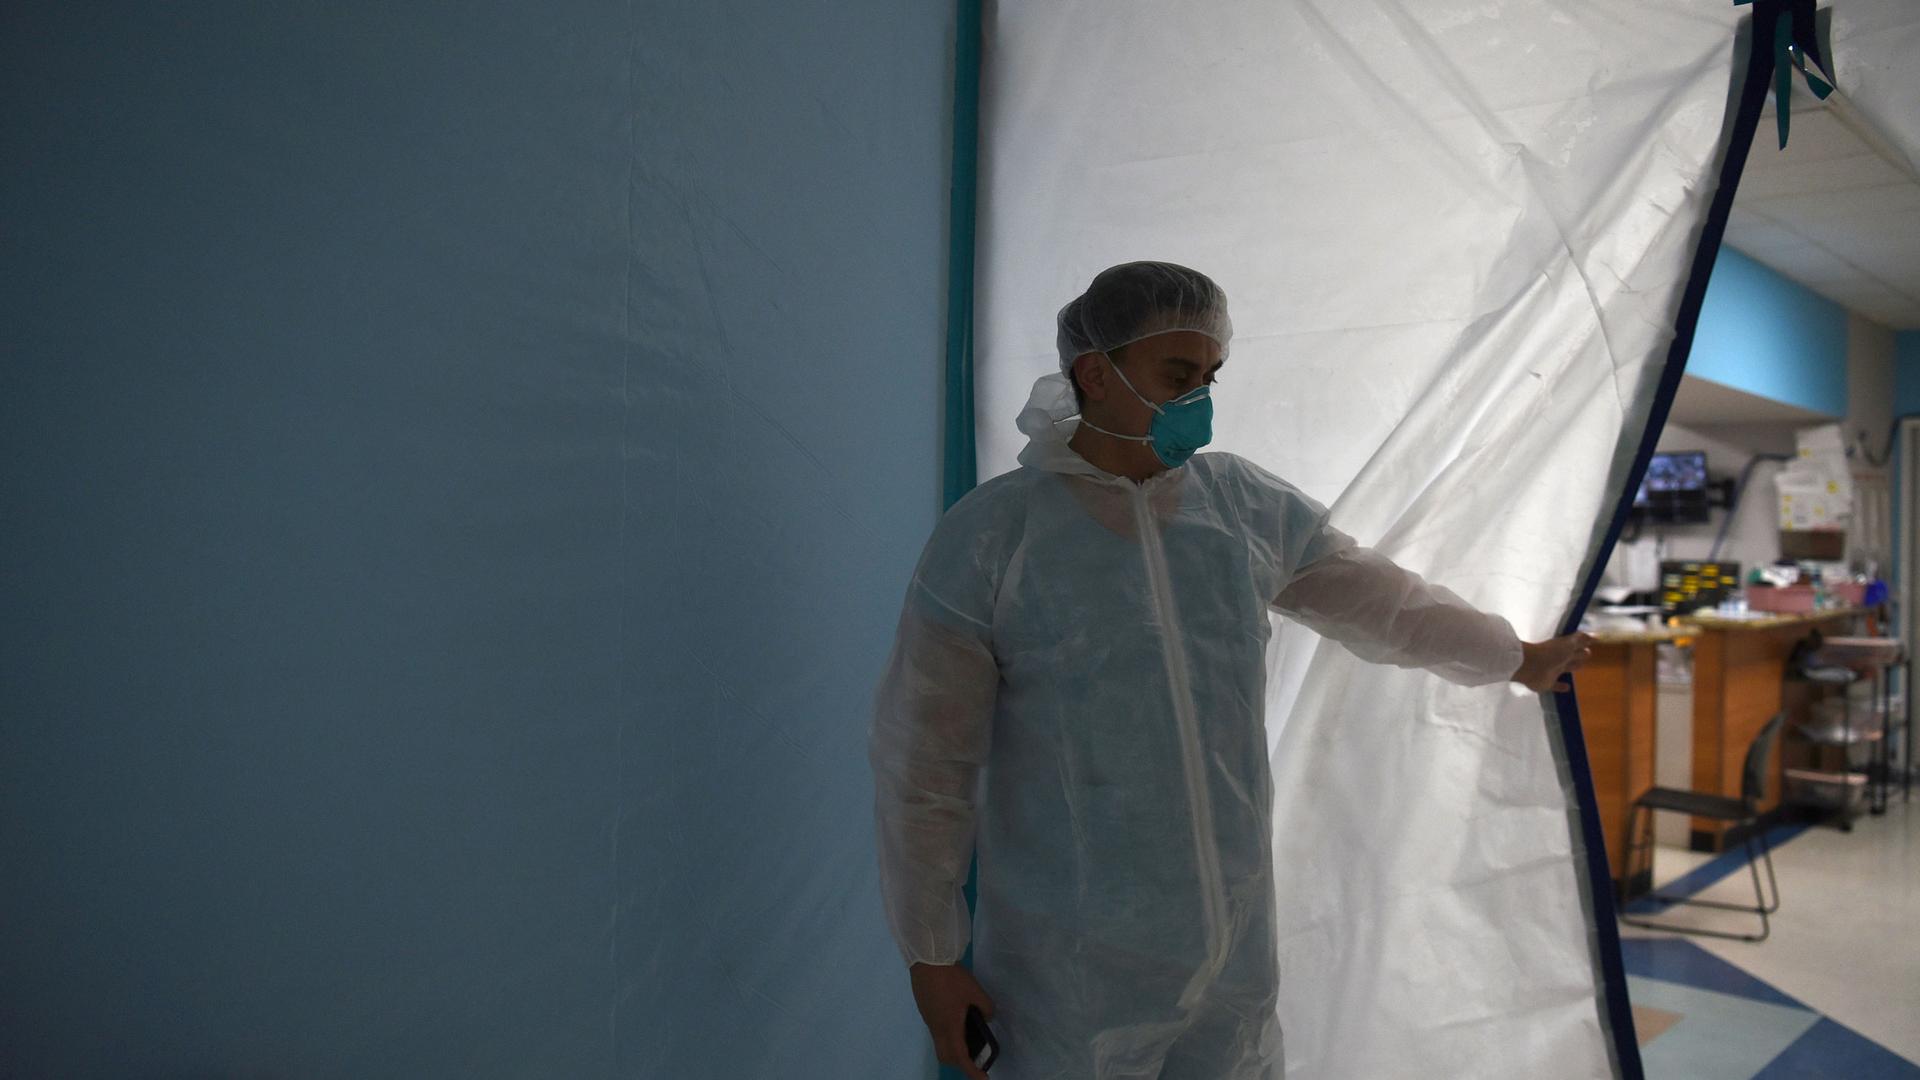 A man is shown wearing medical protective clothing and a face mask while holding open a plastic door.